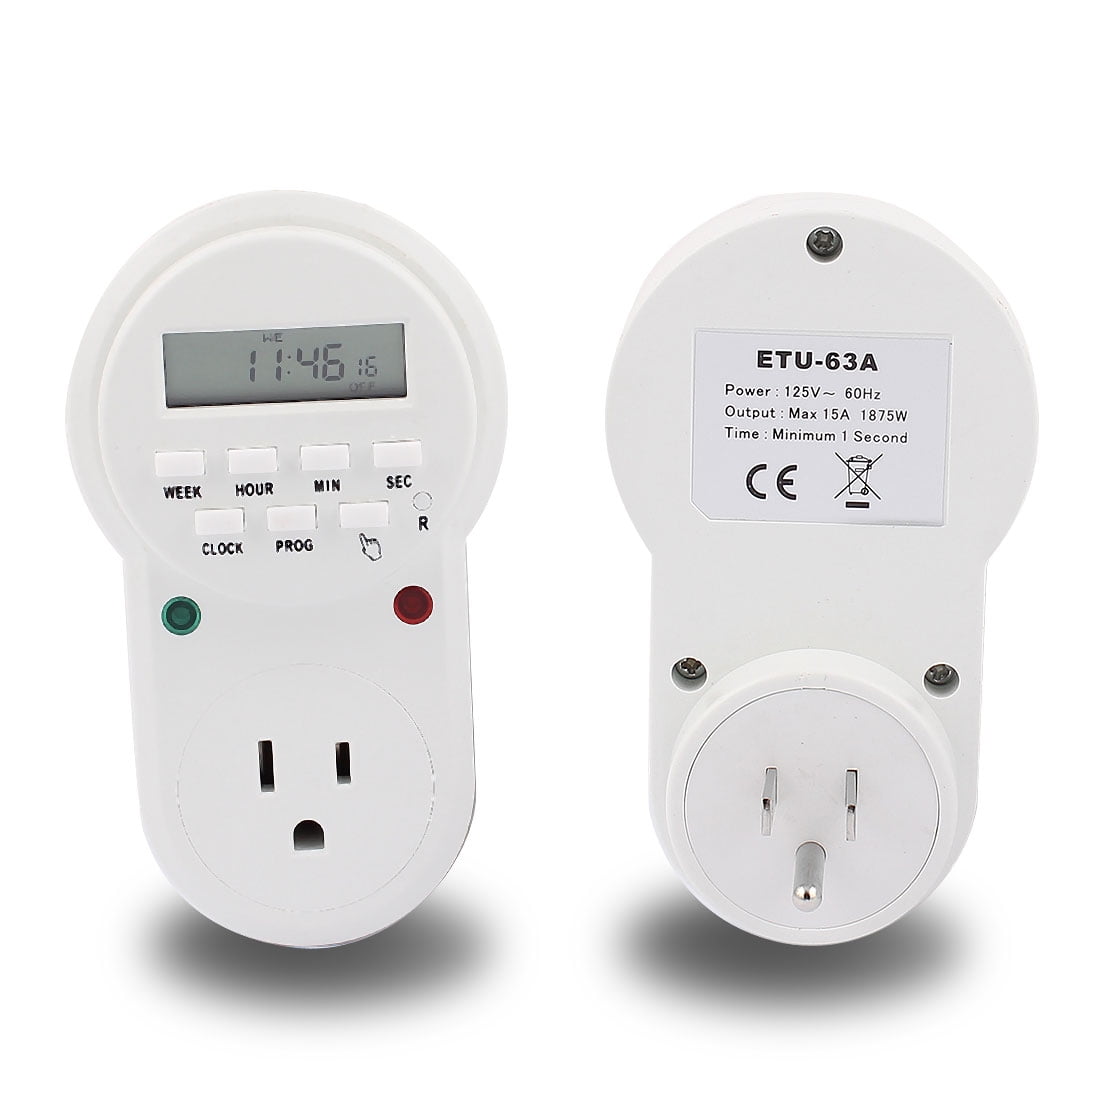 Electronic Digital Timer Outlet 7 Day Programmable Timing Switch US EU UK Plug